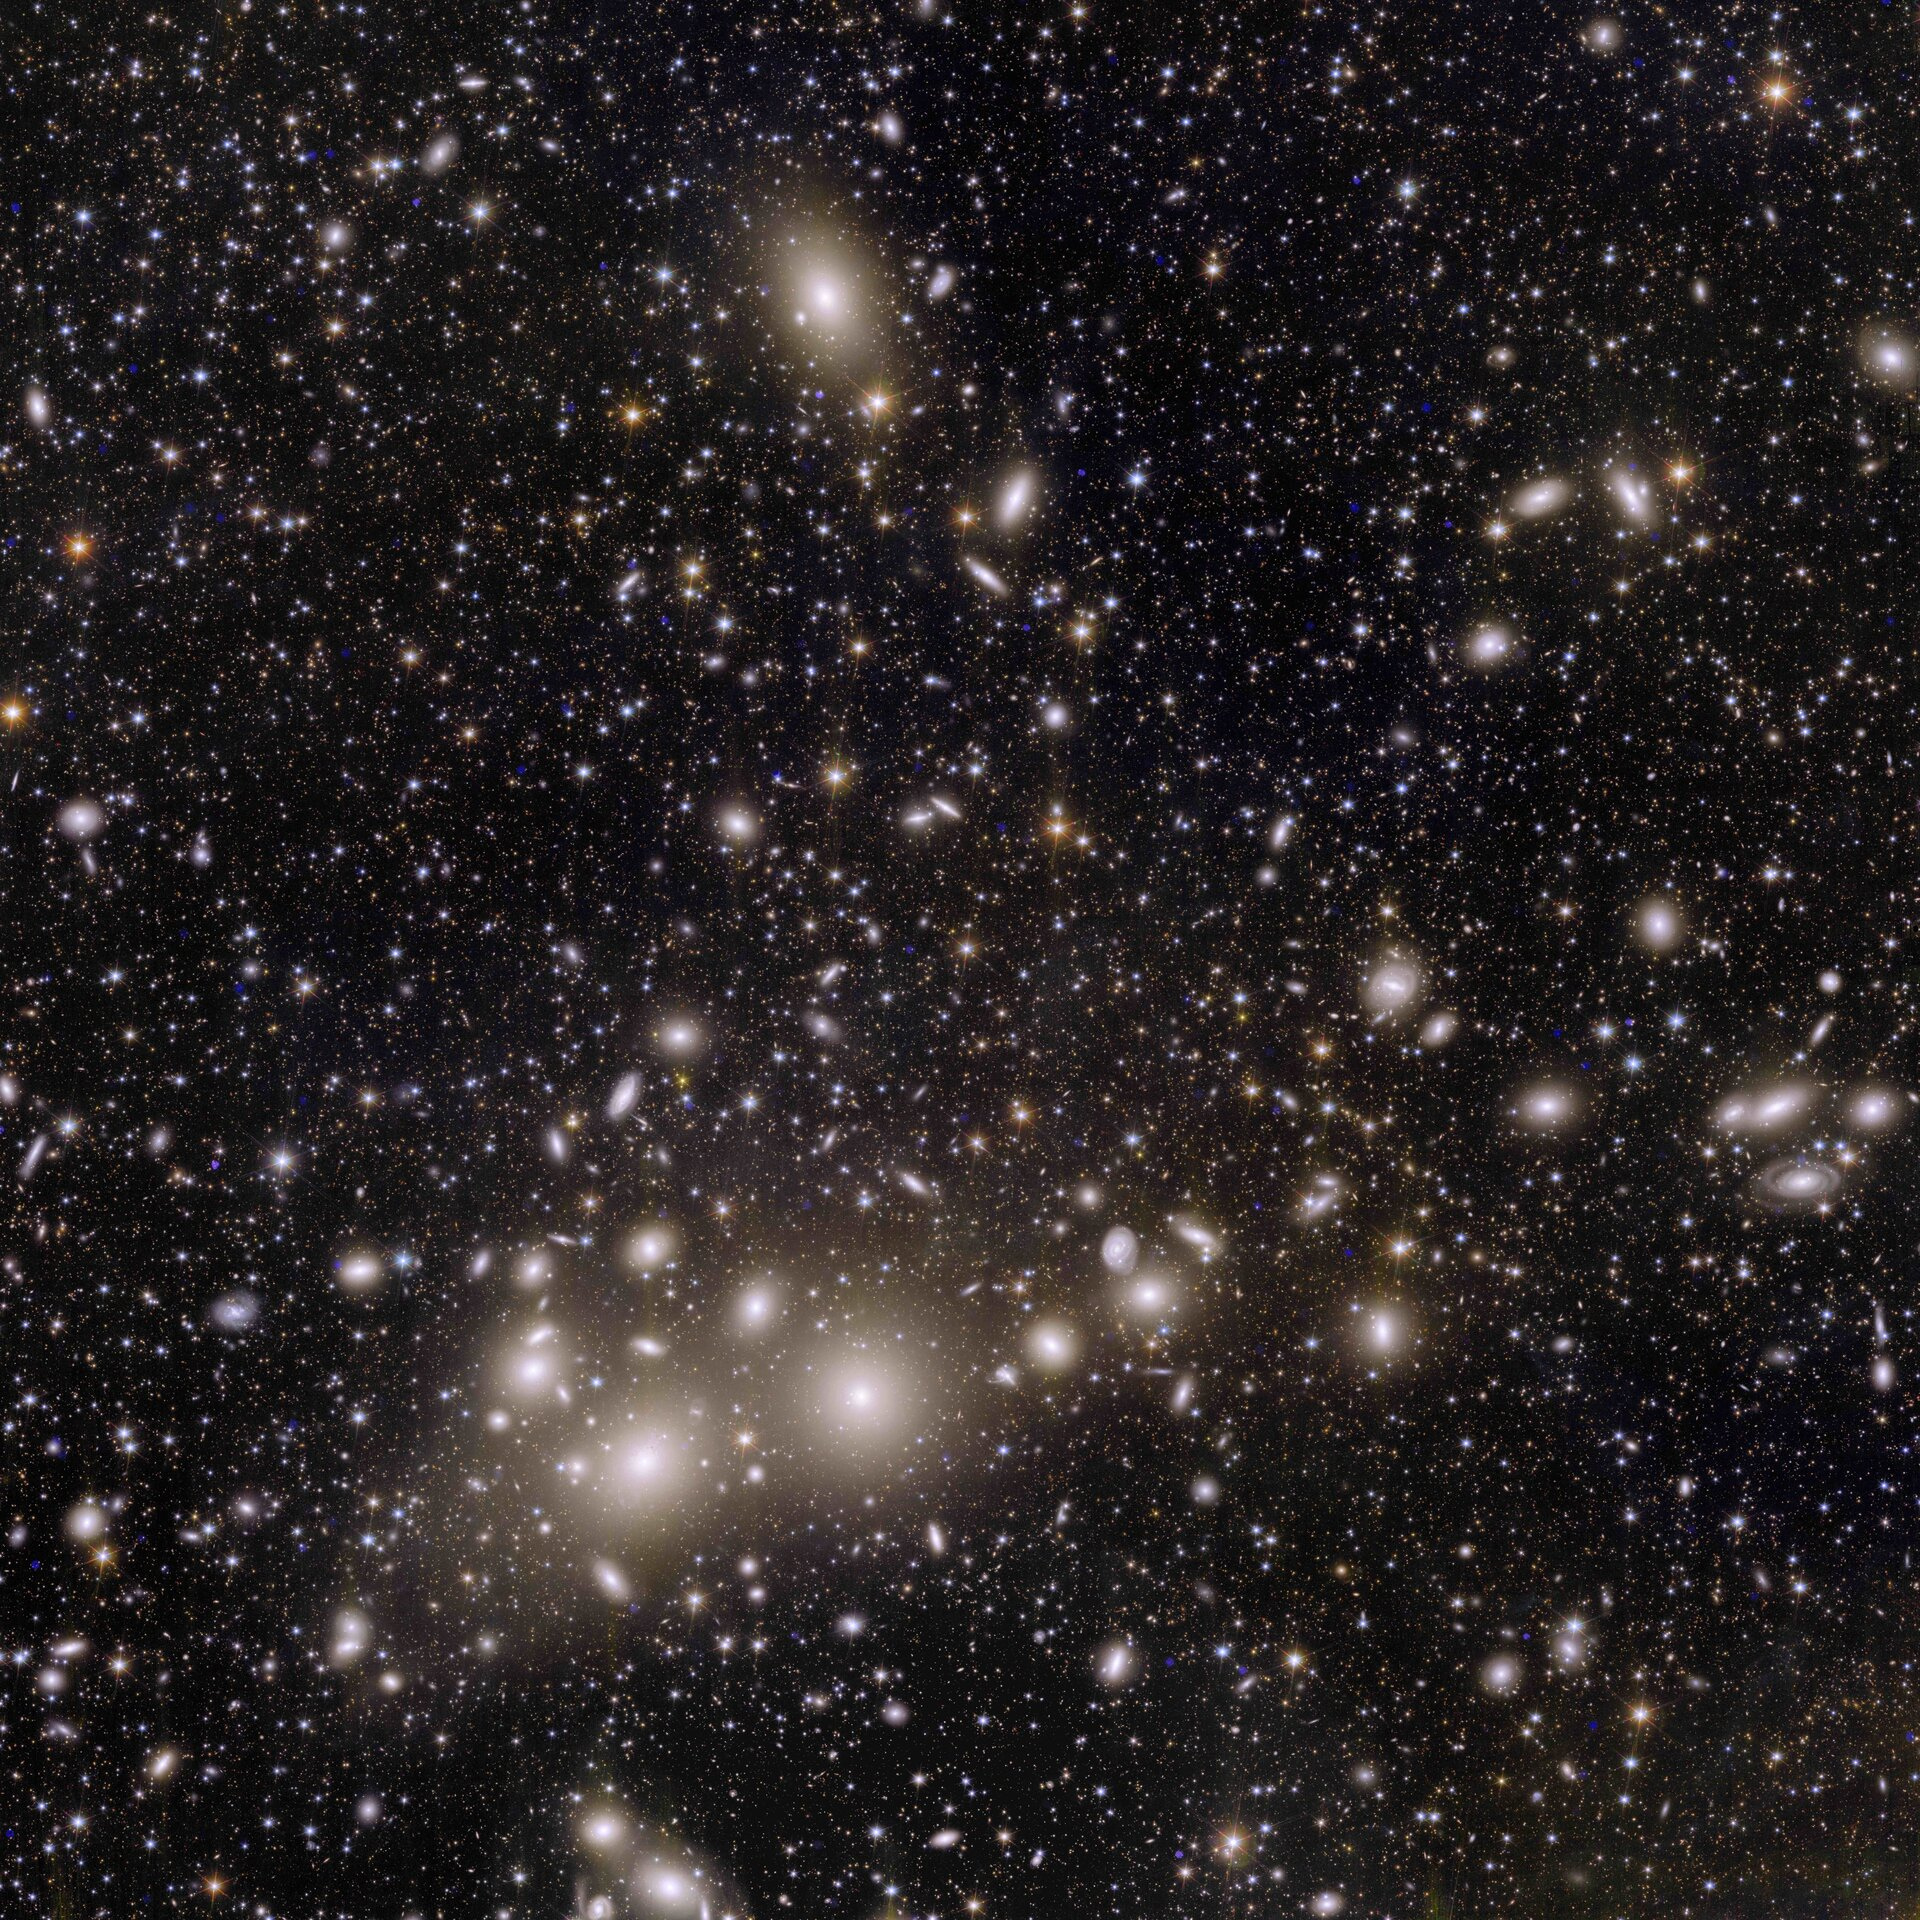 Euclid_s_view_of_the_Perseus_cluster_of_galaxies_pillars.jpg